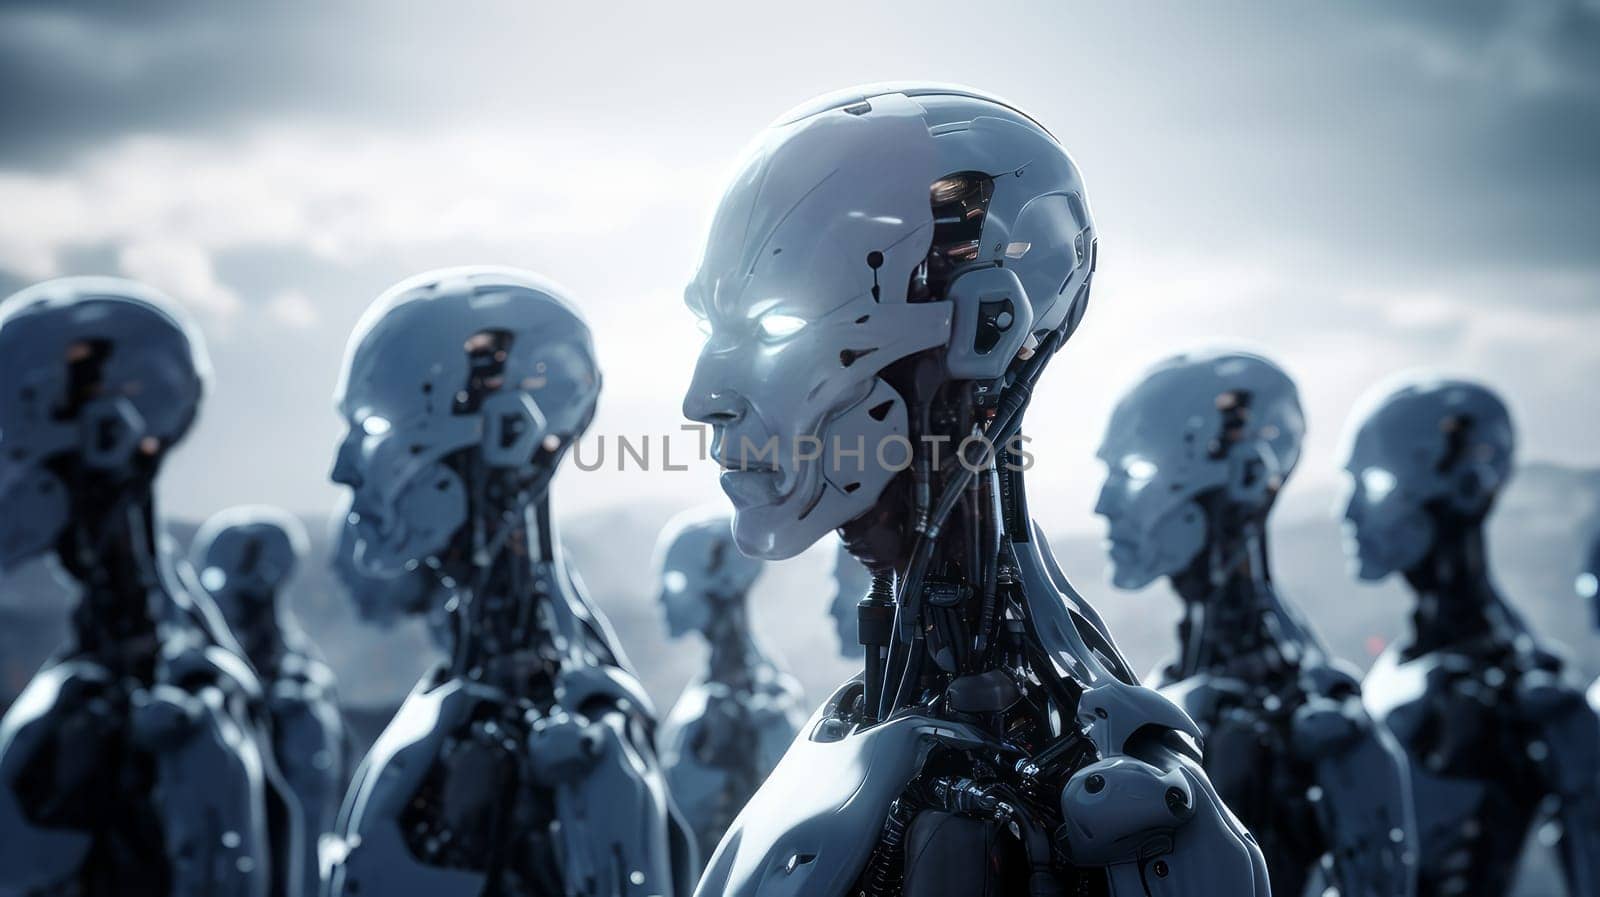 A large number of identical robots with artificial intelligence and future technologies. Internet and digital technologies. Global network. Integrating technology and human interaction. Digital technologies